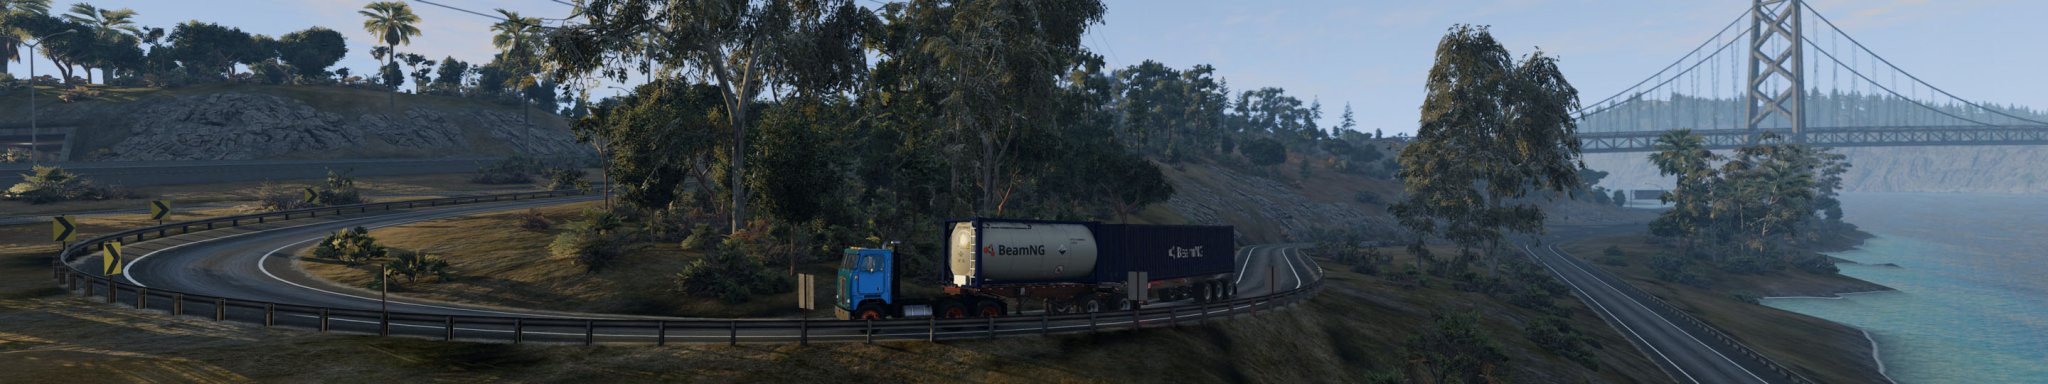 2 BeamNG GAVRIL TC83 BASE Towing 2 Traliers copy.jpg